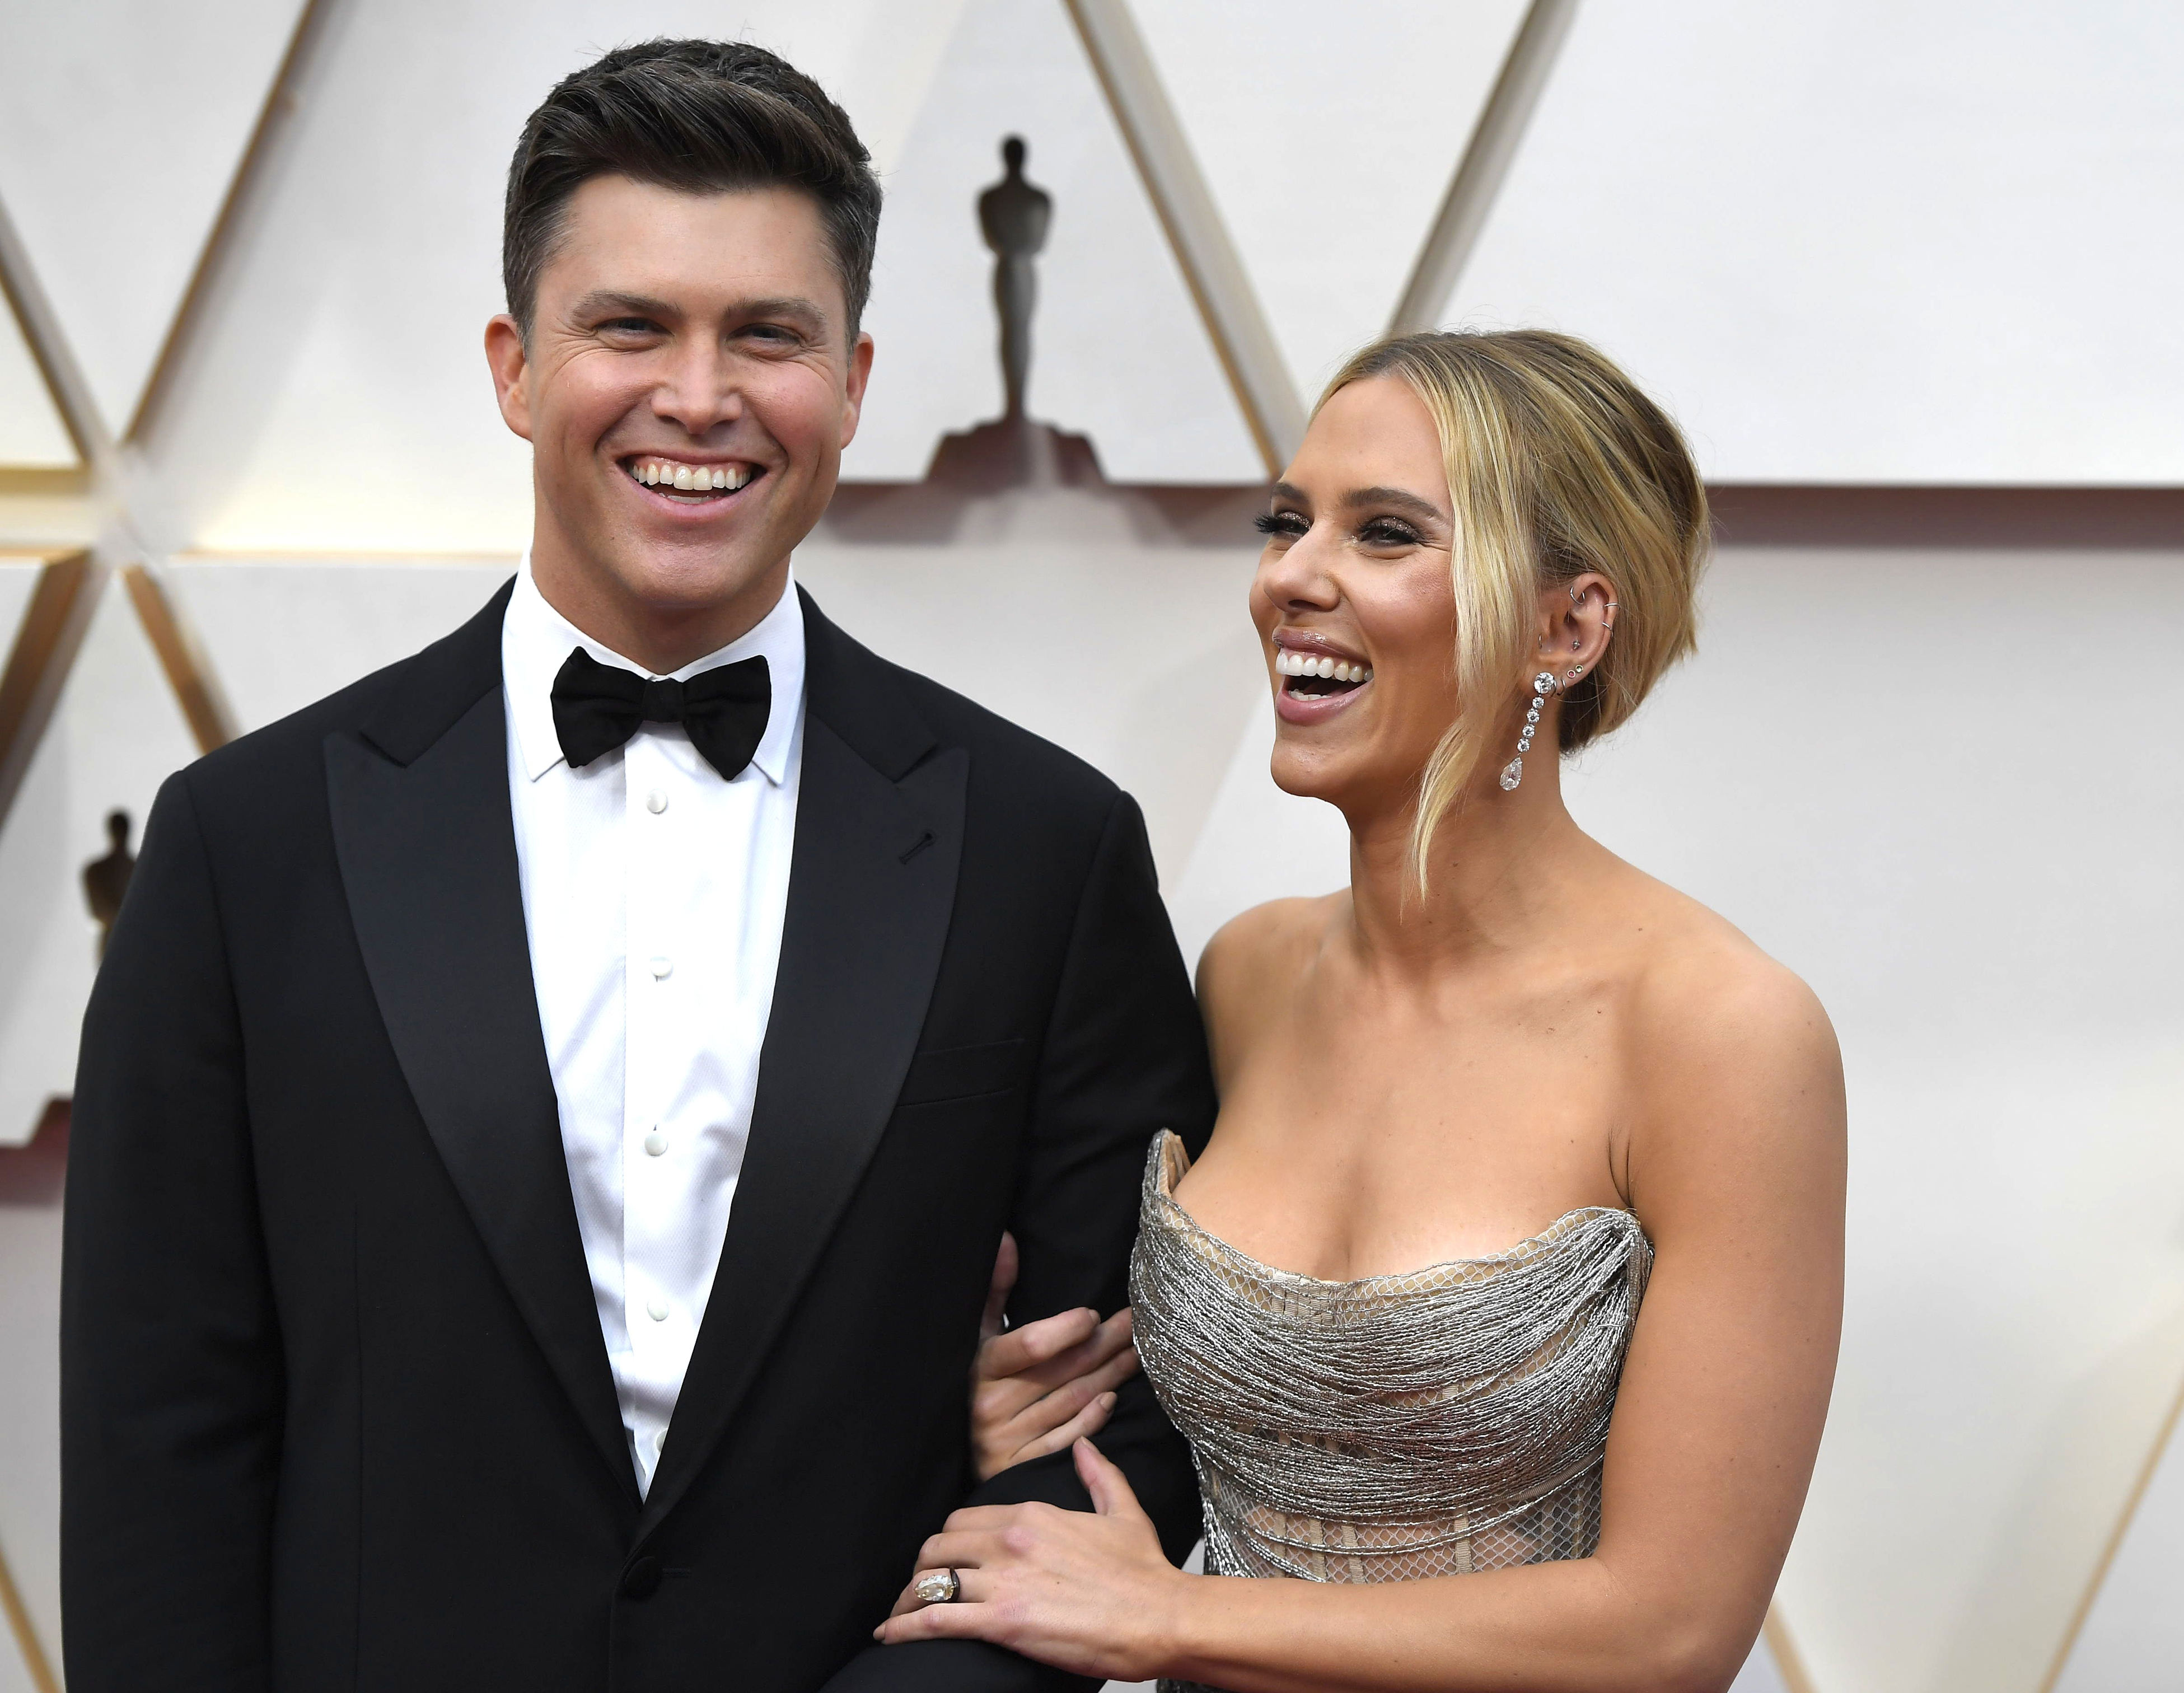 <p><span>In his 2020 memoir "A Very Punchable Face," Colin Jost revealed that he first met <a href="https://www.wonderwall.com/celebrity/profiles/overview/scarlett-johansson-397.article">Scarlett Johansson</a></span> when she hosted "Saturday Night Live" for the first time in 2006 while he was serving as a writer on the sketch-comedy series: "She claims that she remembers thinking I was 'cute' but I know what I looked like and that's not the word I would have used. ('Shaggy' would have been more generous. 'Slovenly' would have been more accurate)," he wrote. "I remember her being beautiful, smart, sweet and intimidatingly sophisticated," he continued. "And she had a grace and a smile that I've still never seen in any other human." They <a href="https://www.wonderwall.com/celebrity/scarlett-johansson-and-colin-jost-spotted-kissing-snl-afterparty-plus-more-news-3006717.gallery">finally started dating</a> after Scarlett hosted "SNL" for the fifth time in 2017. Colin and Scarlett <a href="https://www.wonderwall.com/celebrity/celeb-weddings-2020-3022551.gallery?photoId=397007">married in 2020</a>.</p>